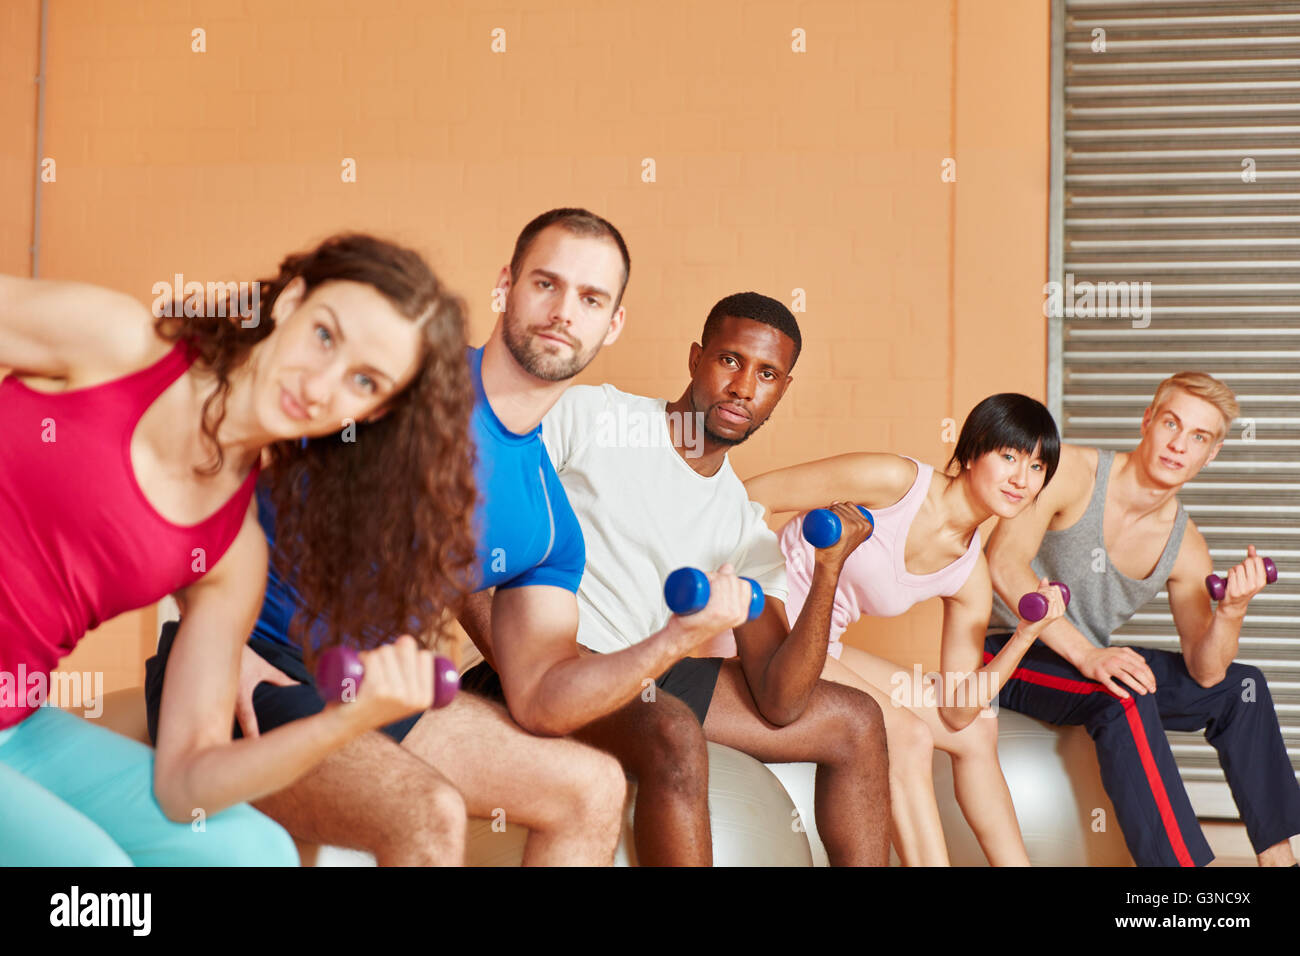 Interracial group training with dumbbells at the gym Stock Photo